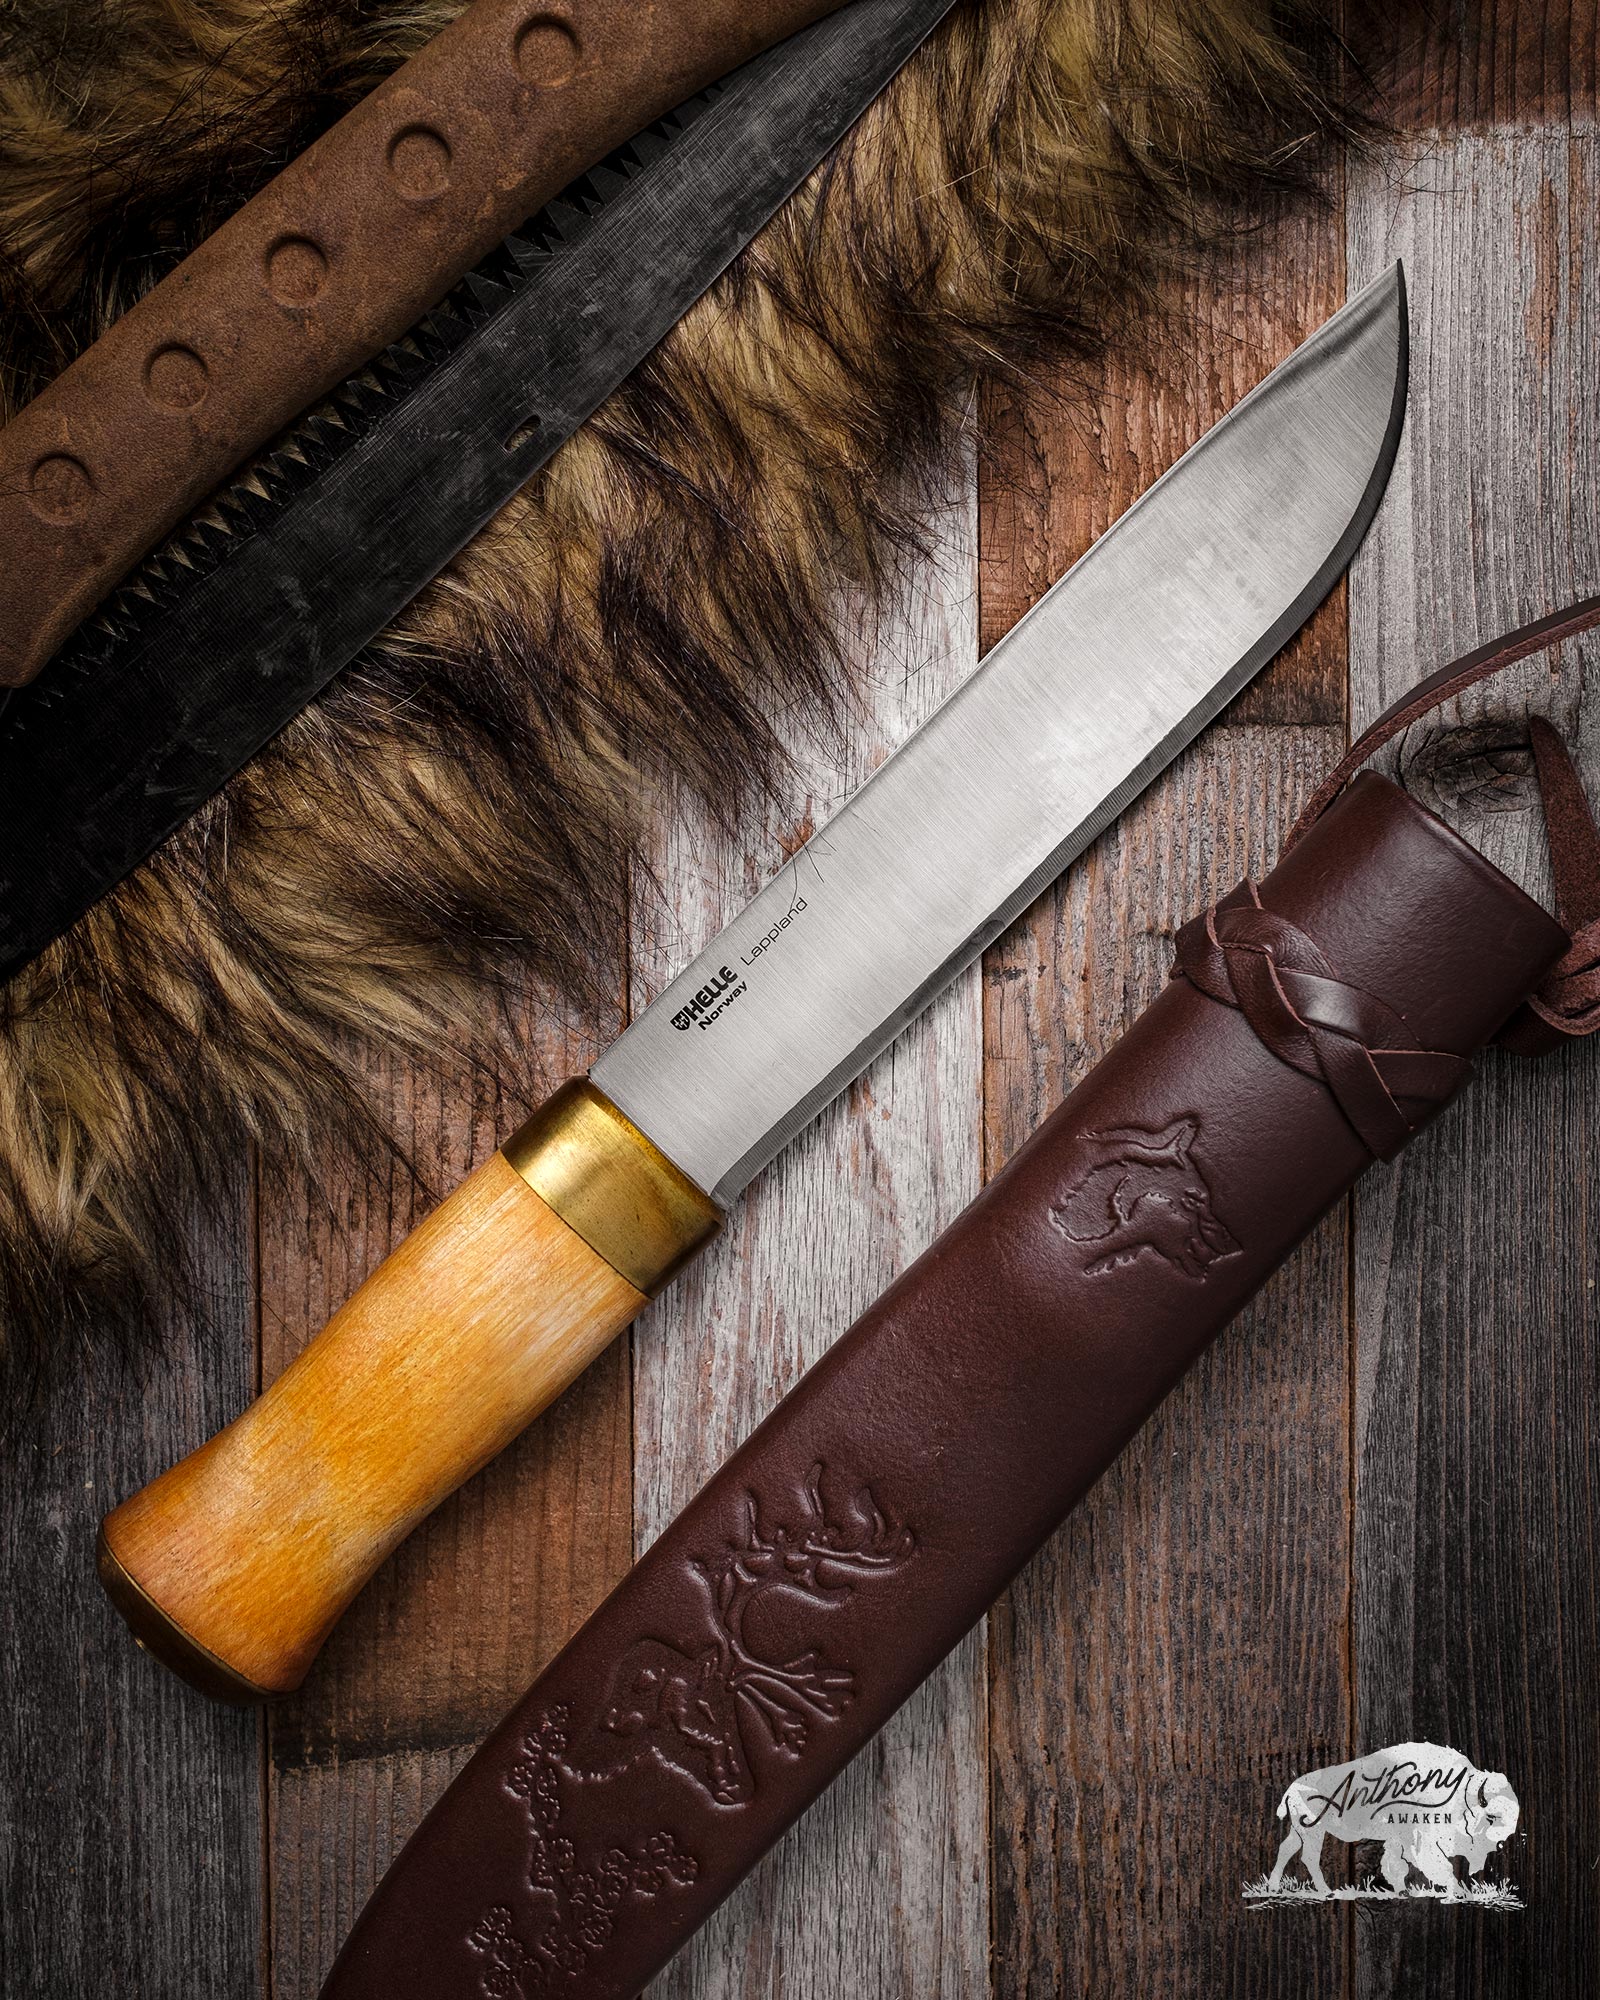 Helle Lappland Review